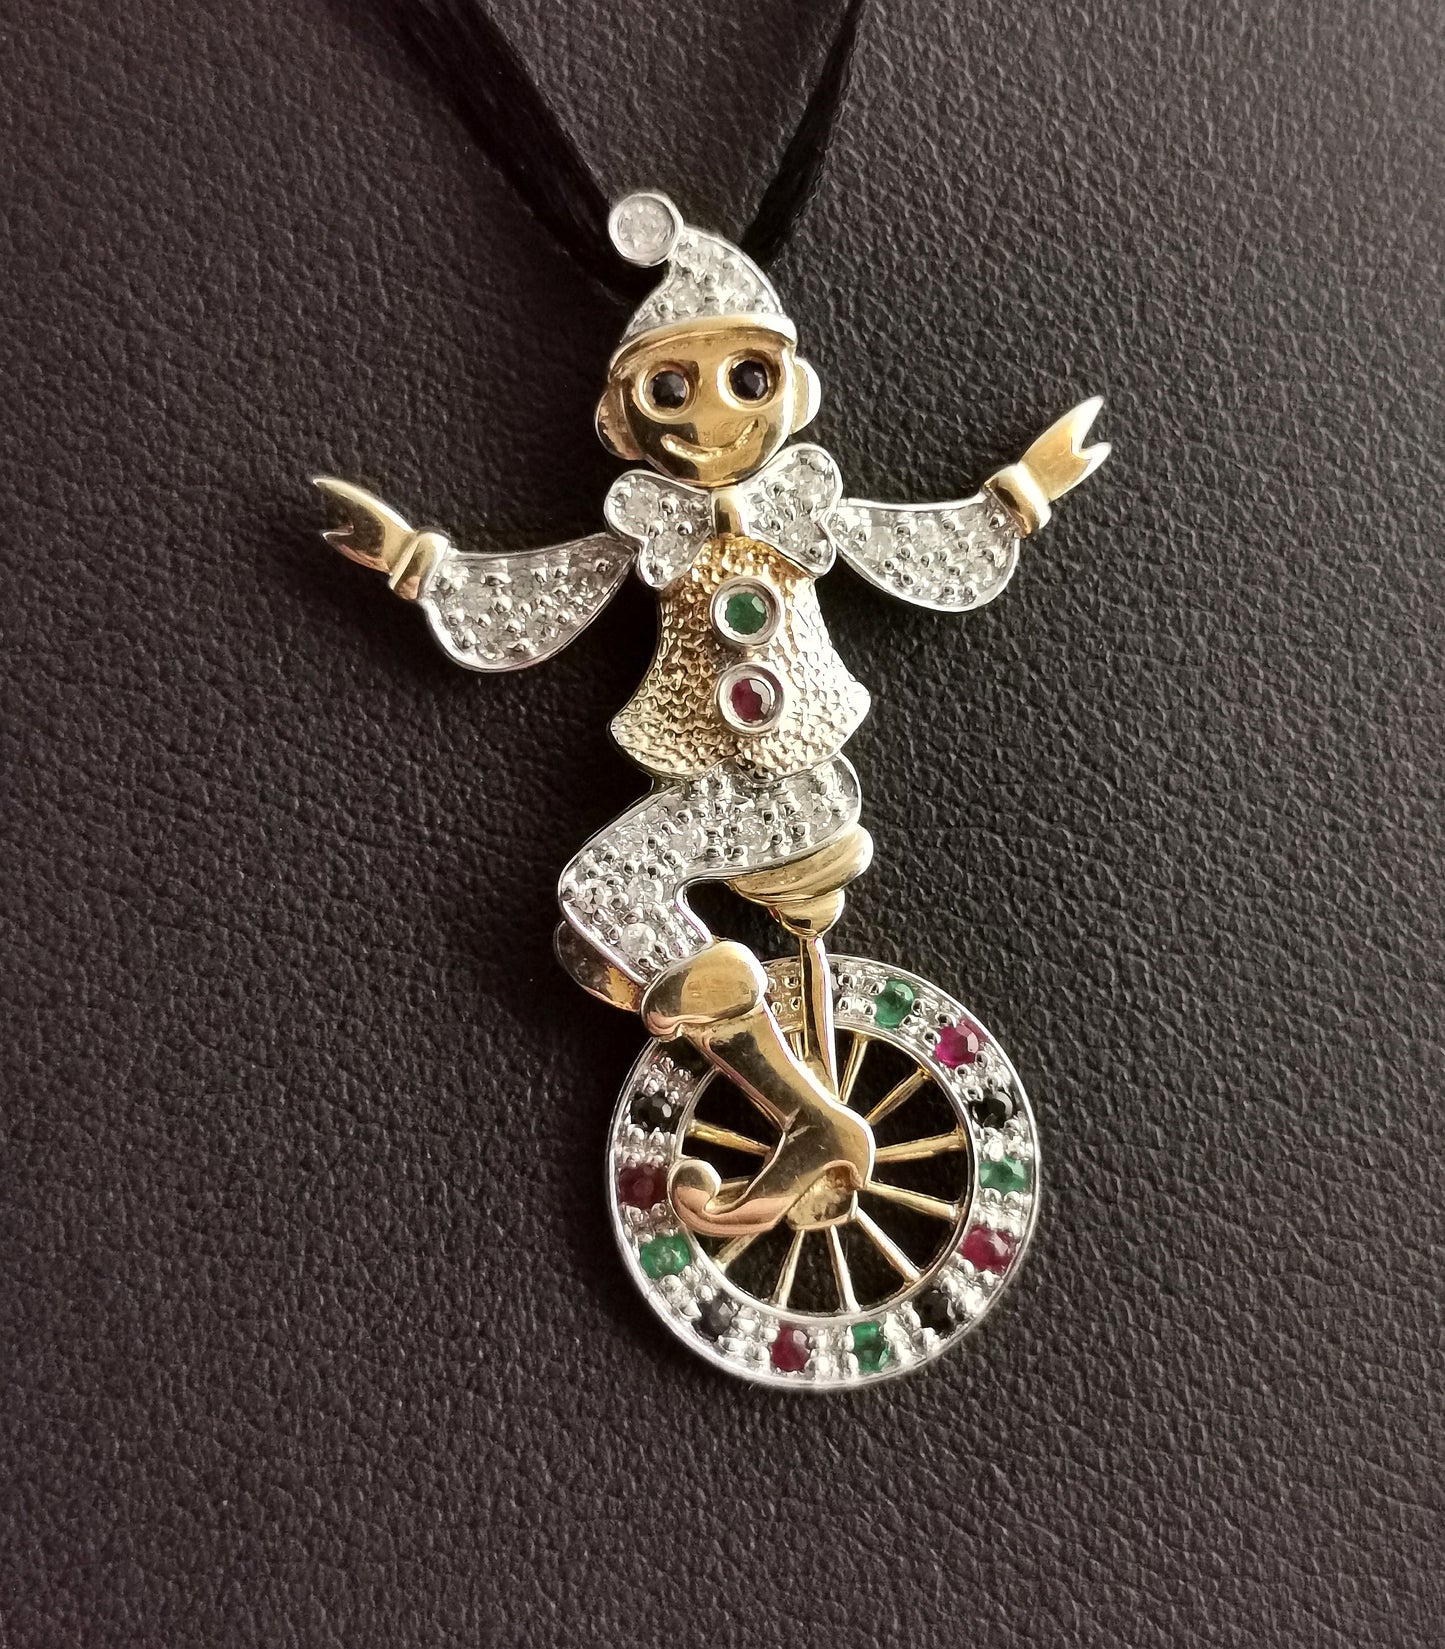 Vintage Gemstone Clown and Unicycle pendant, 9ct gold, Diamond, Emerald, Ruby and Sapphire